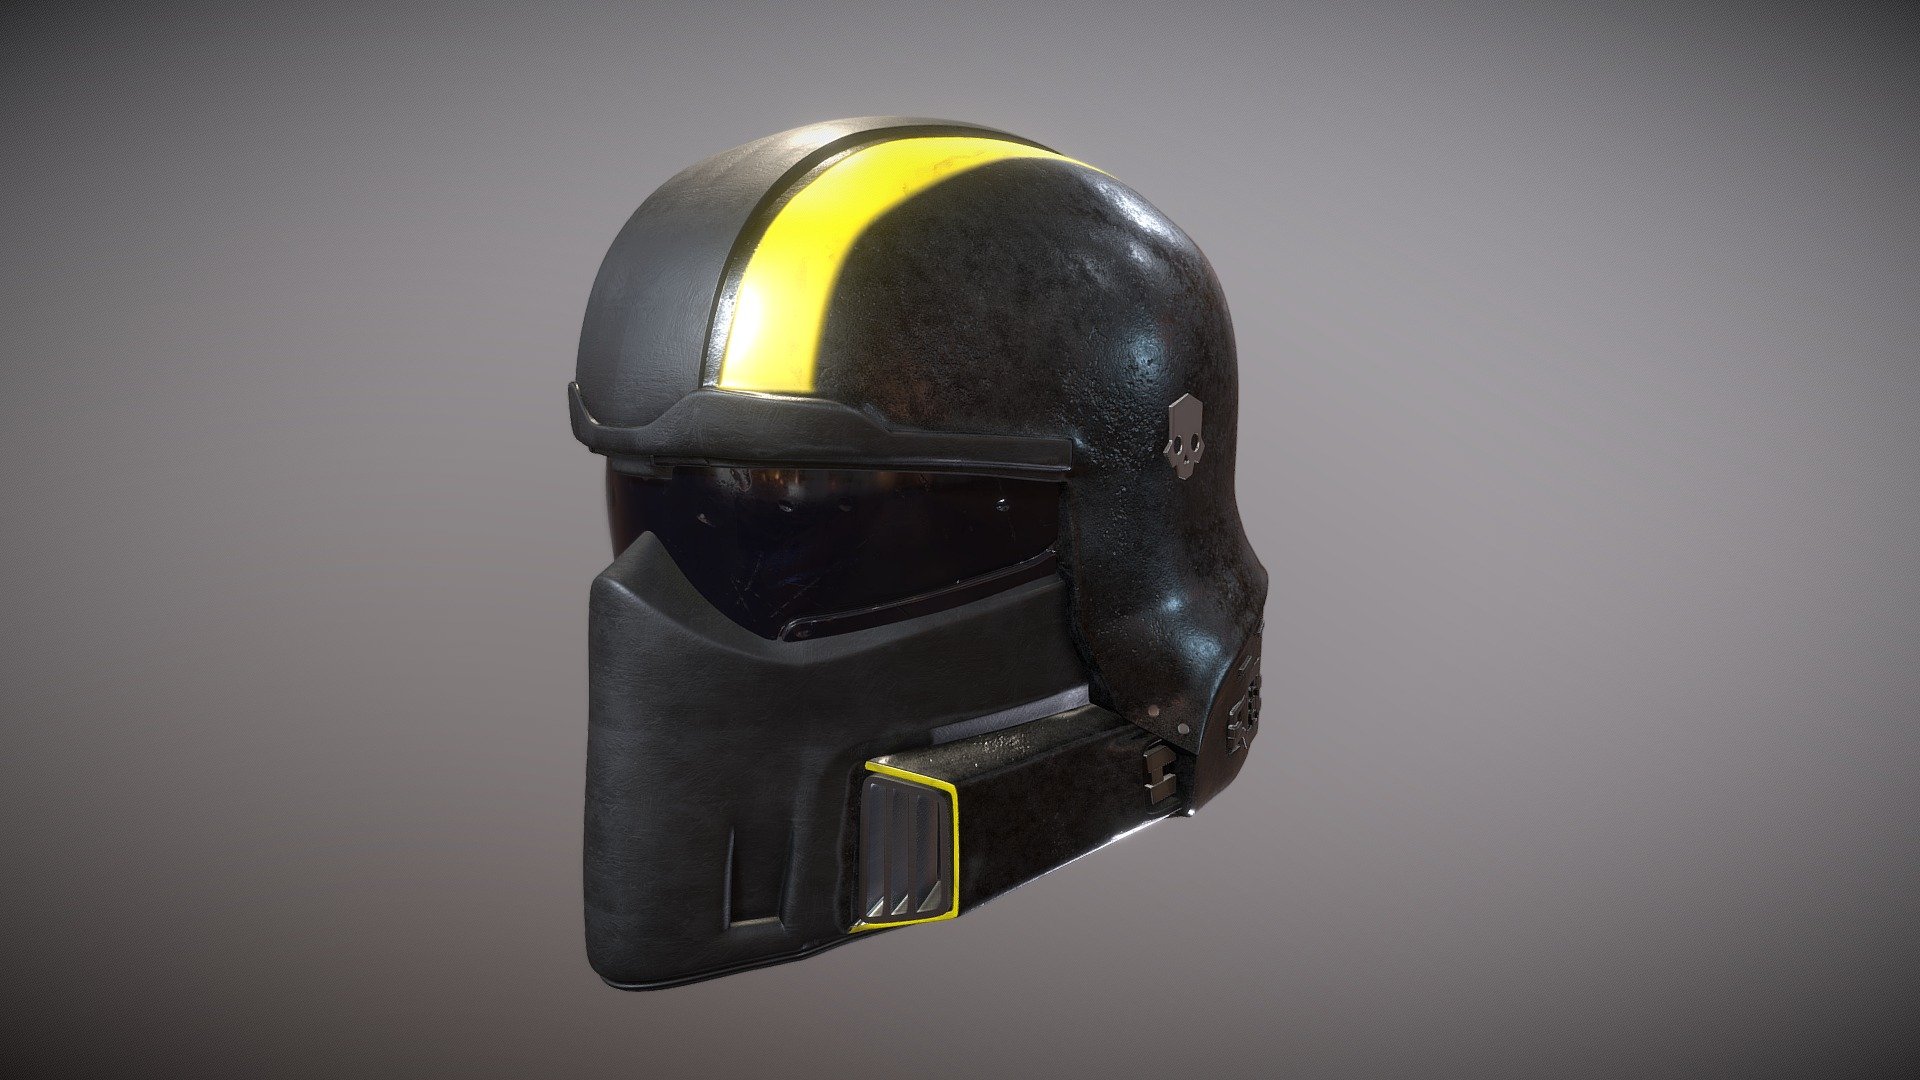 A Fun project For spreading Democracy!

Watch the modeling procces in my social networks, you can even try 3D printing it - HelldiversTacticalHelmet - 3D model by igambitoi 3d model